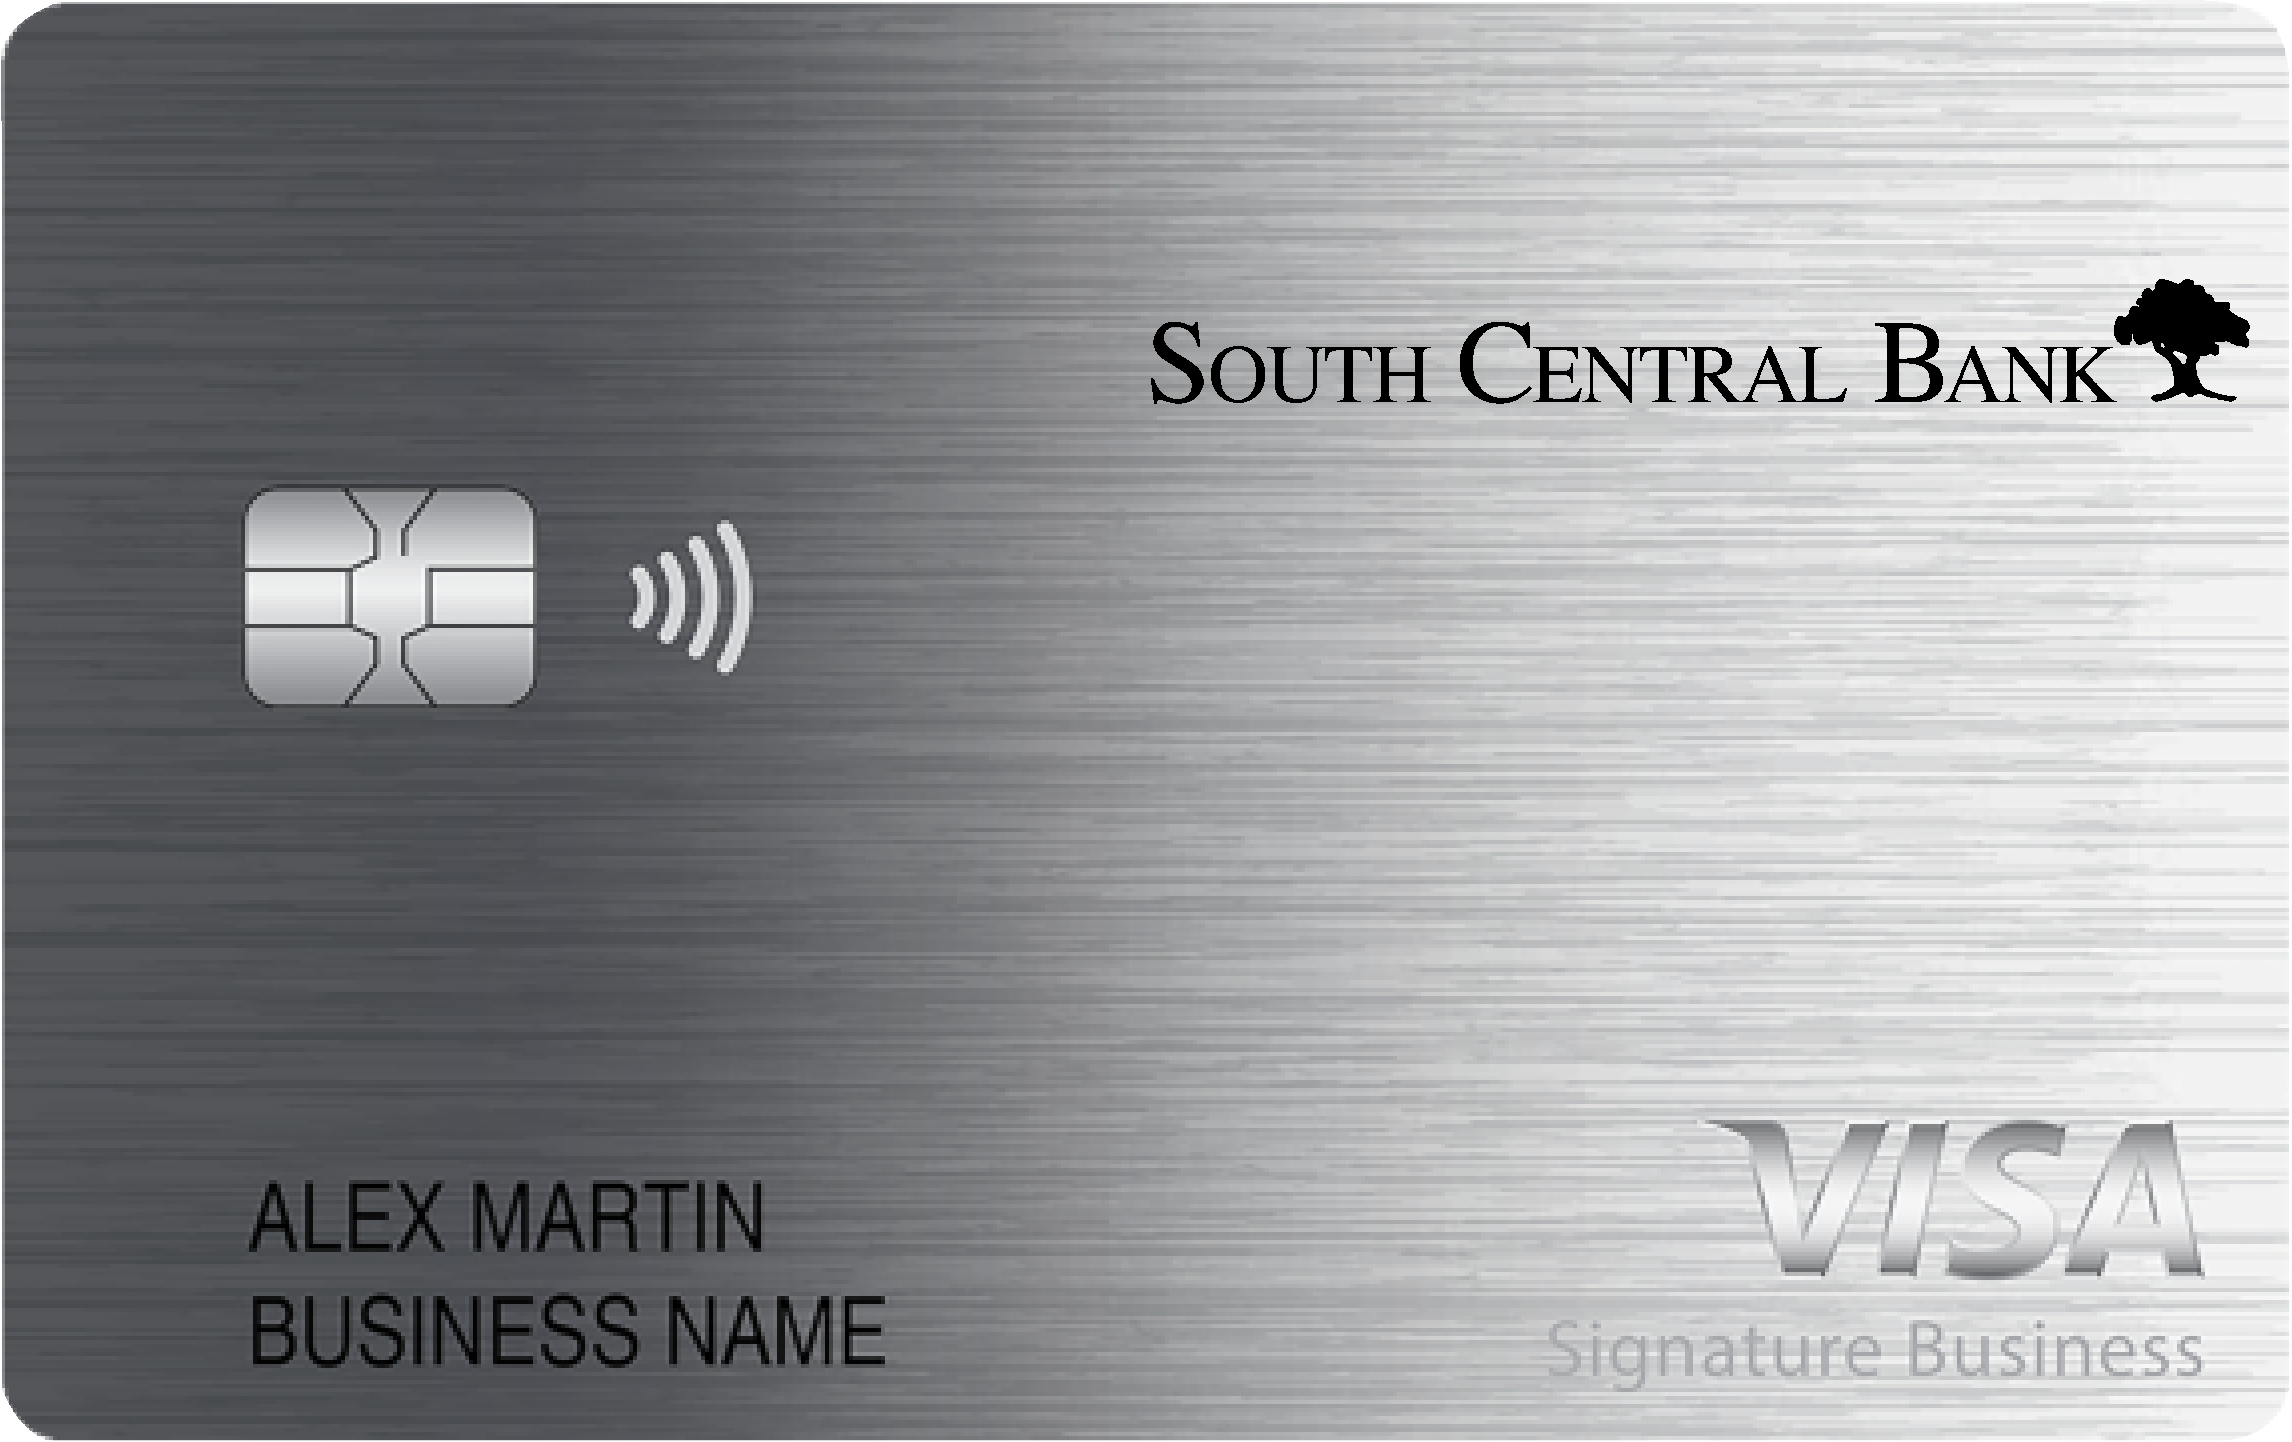 South Central Bank Inc